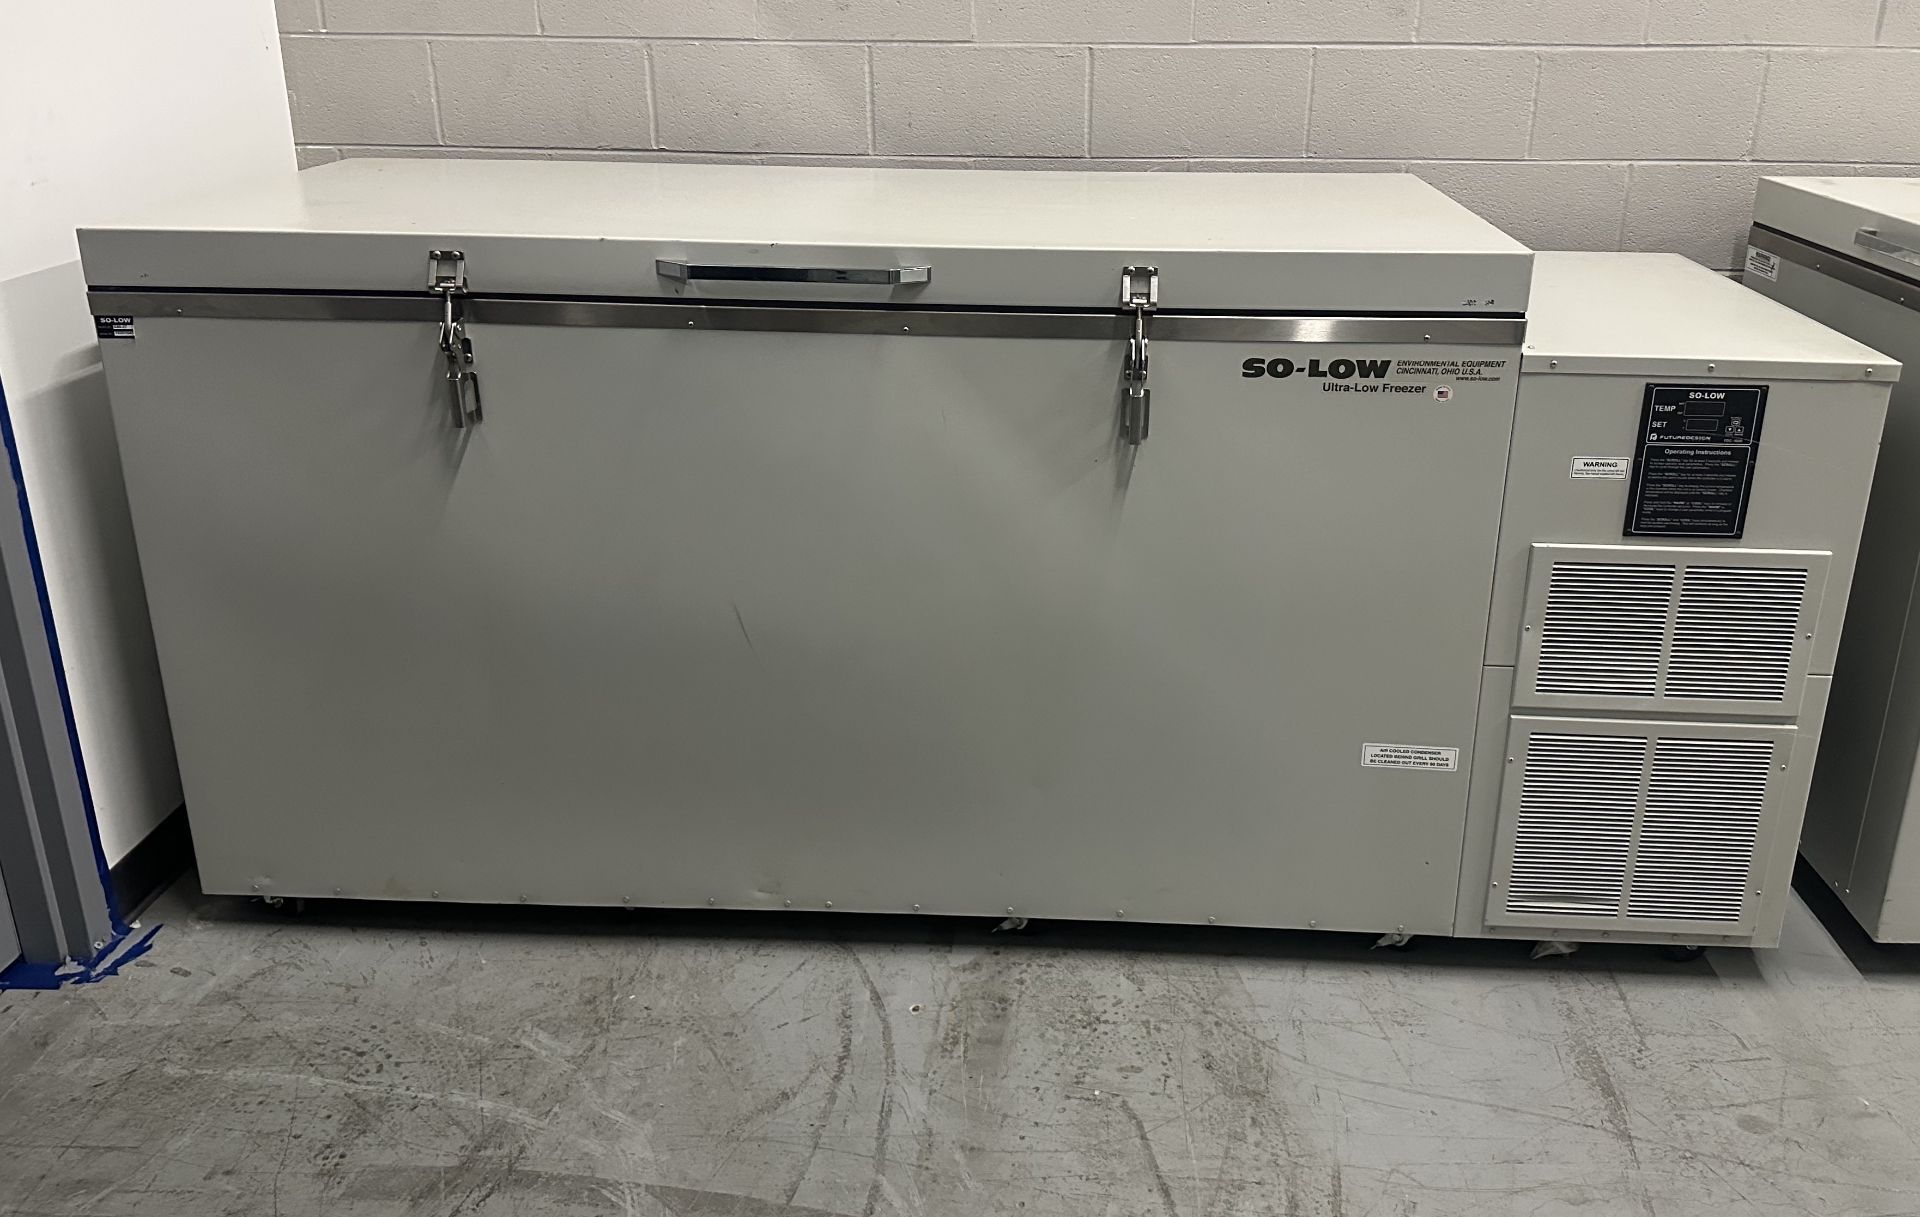 Lot of (3) Used So-Low Explosion Proof Chest-Style Freezer. Model C80-27